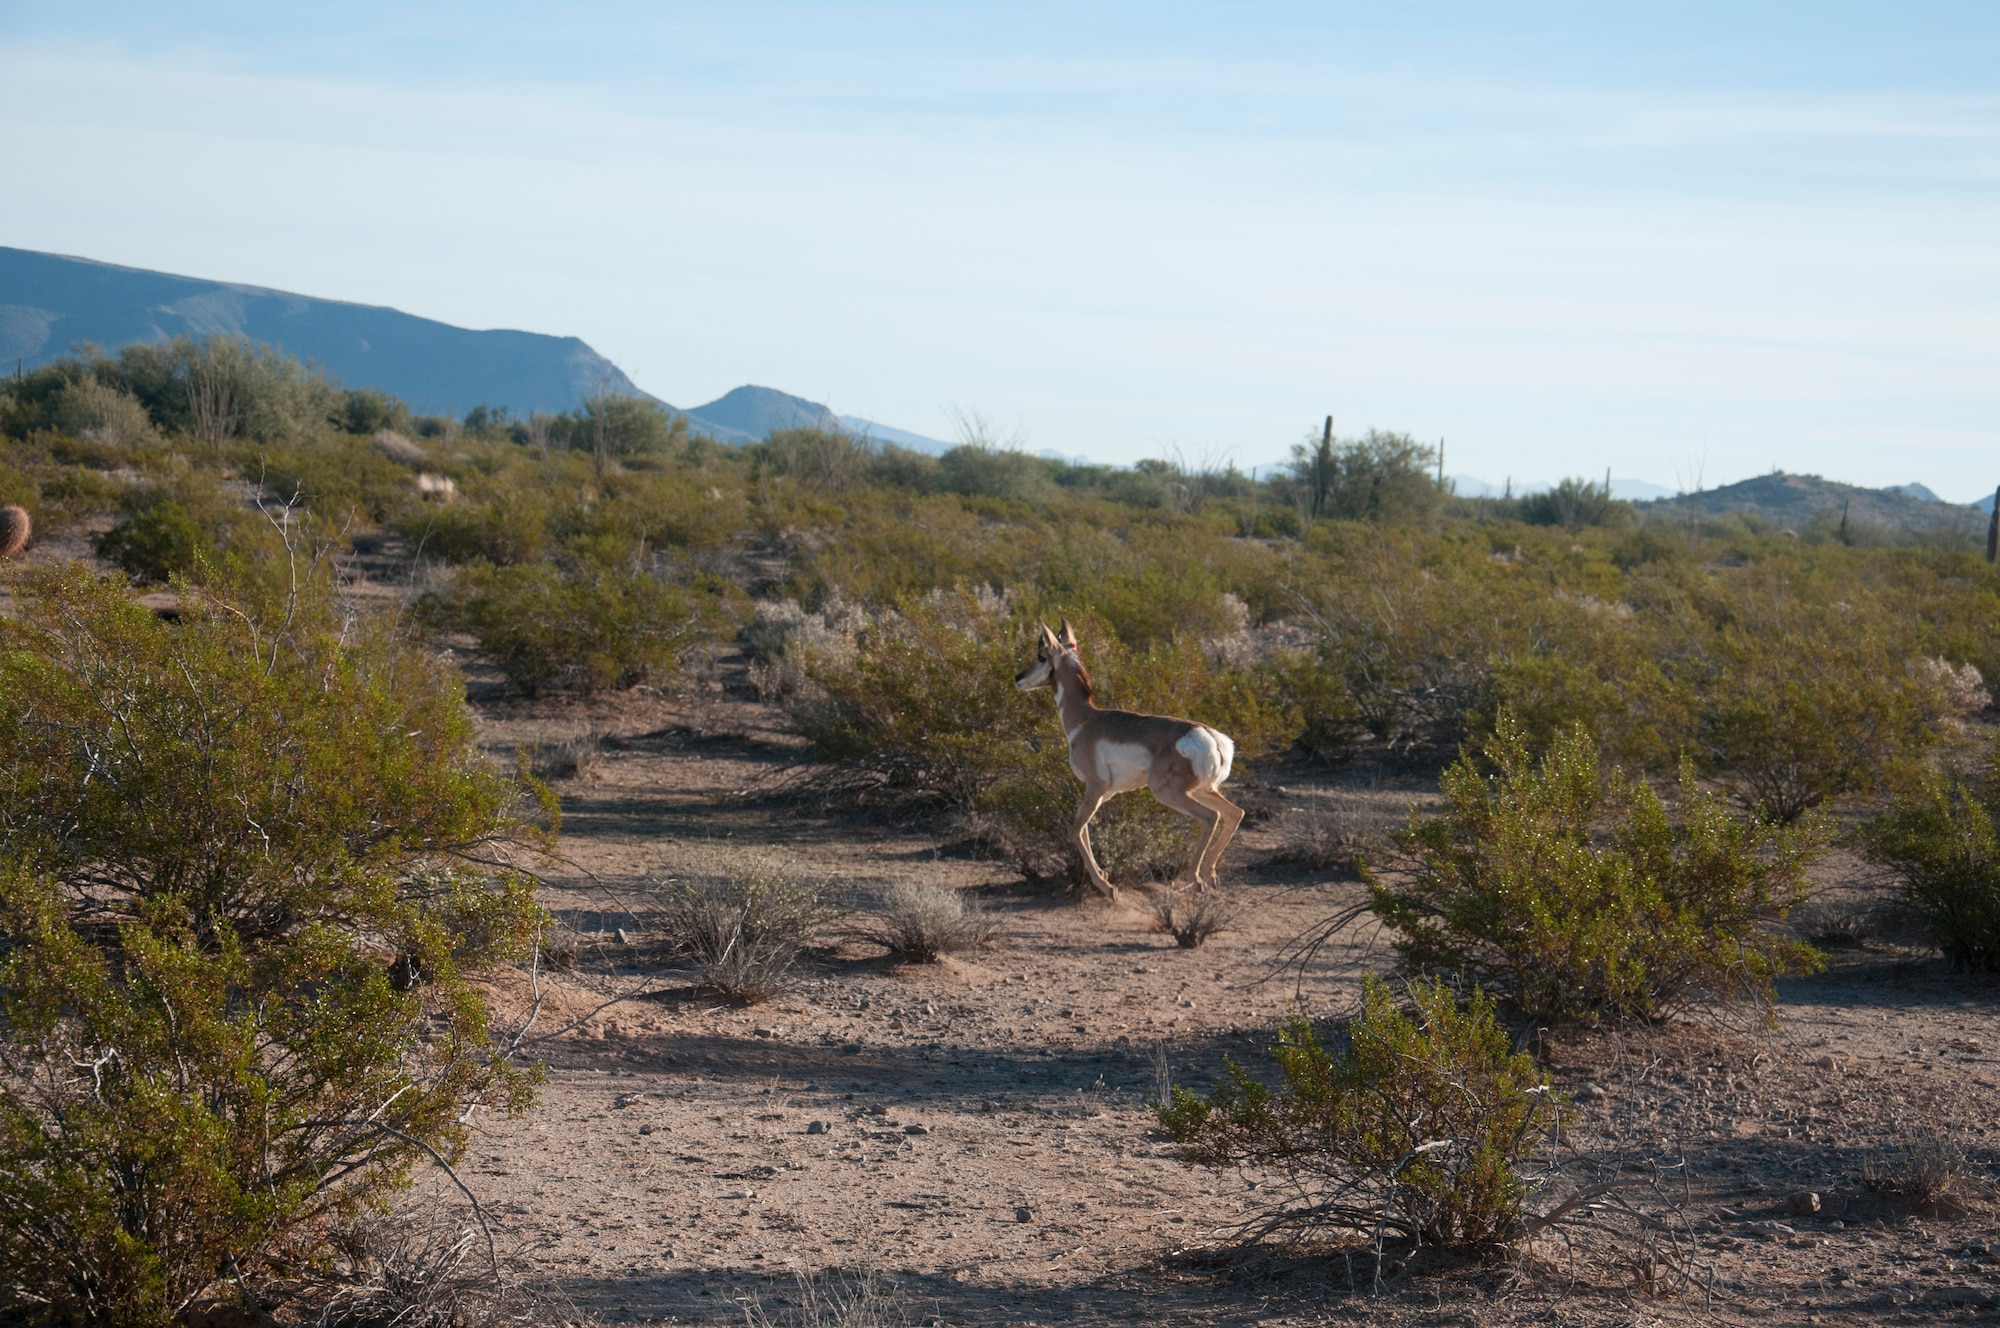 Recovery teams at the Barry M. Goldwater Range in Arizona are taking measures to safeguard endangered Sonoran pronghorns. The population crashed to a low of just 21 animals in 2002, prompting the initiation of a full-scale recovery effort. (U.S. Air Force photo/Released/Monica Guevara)